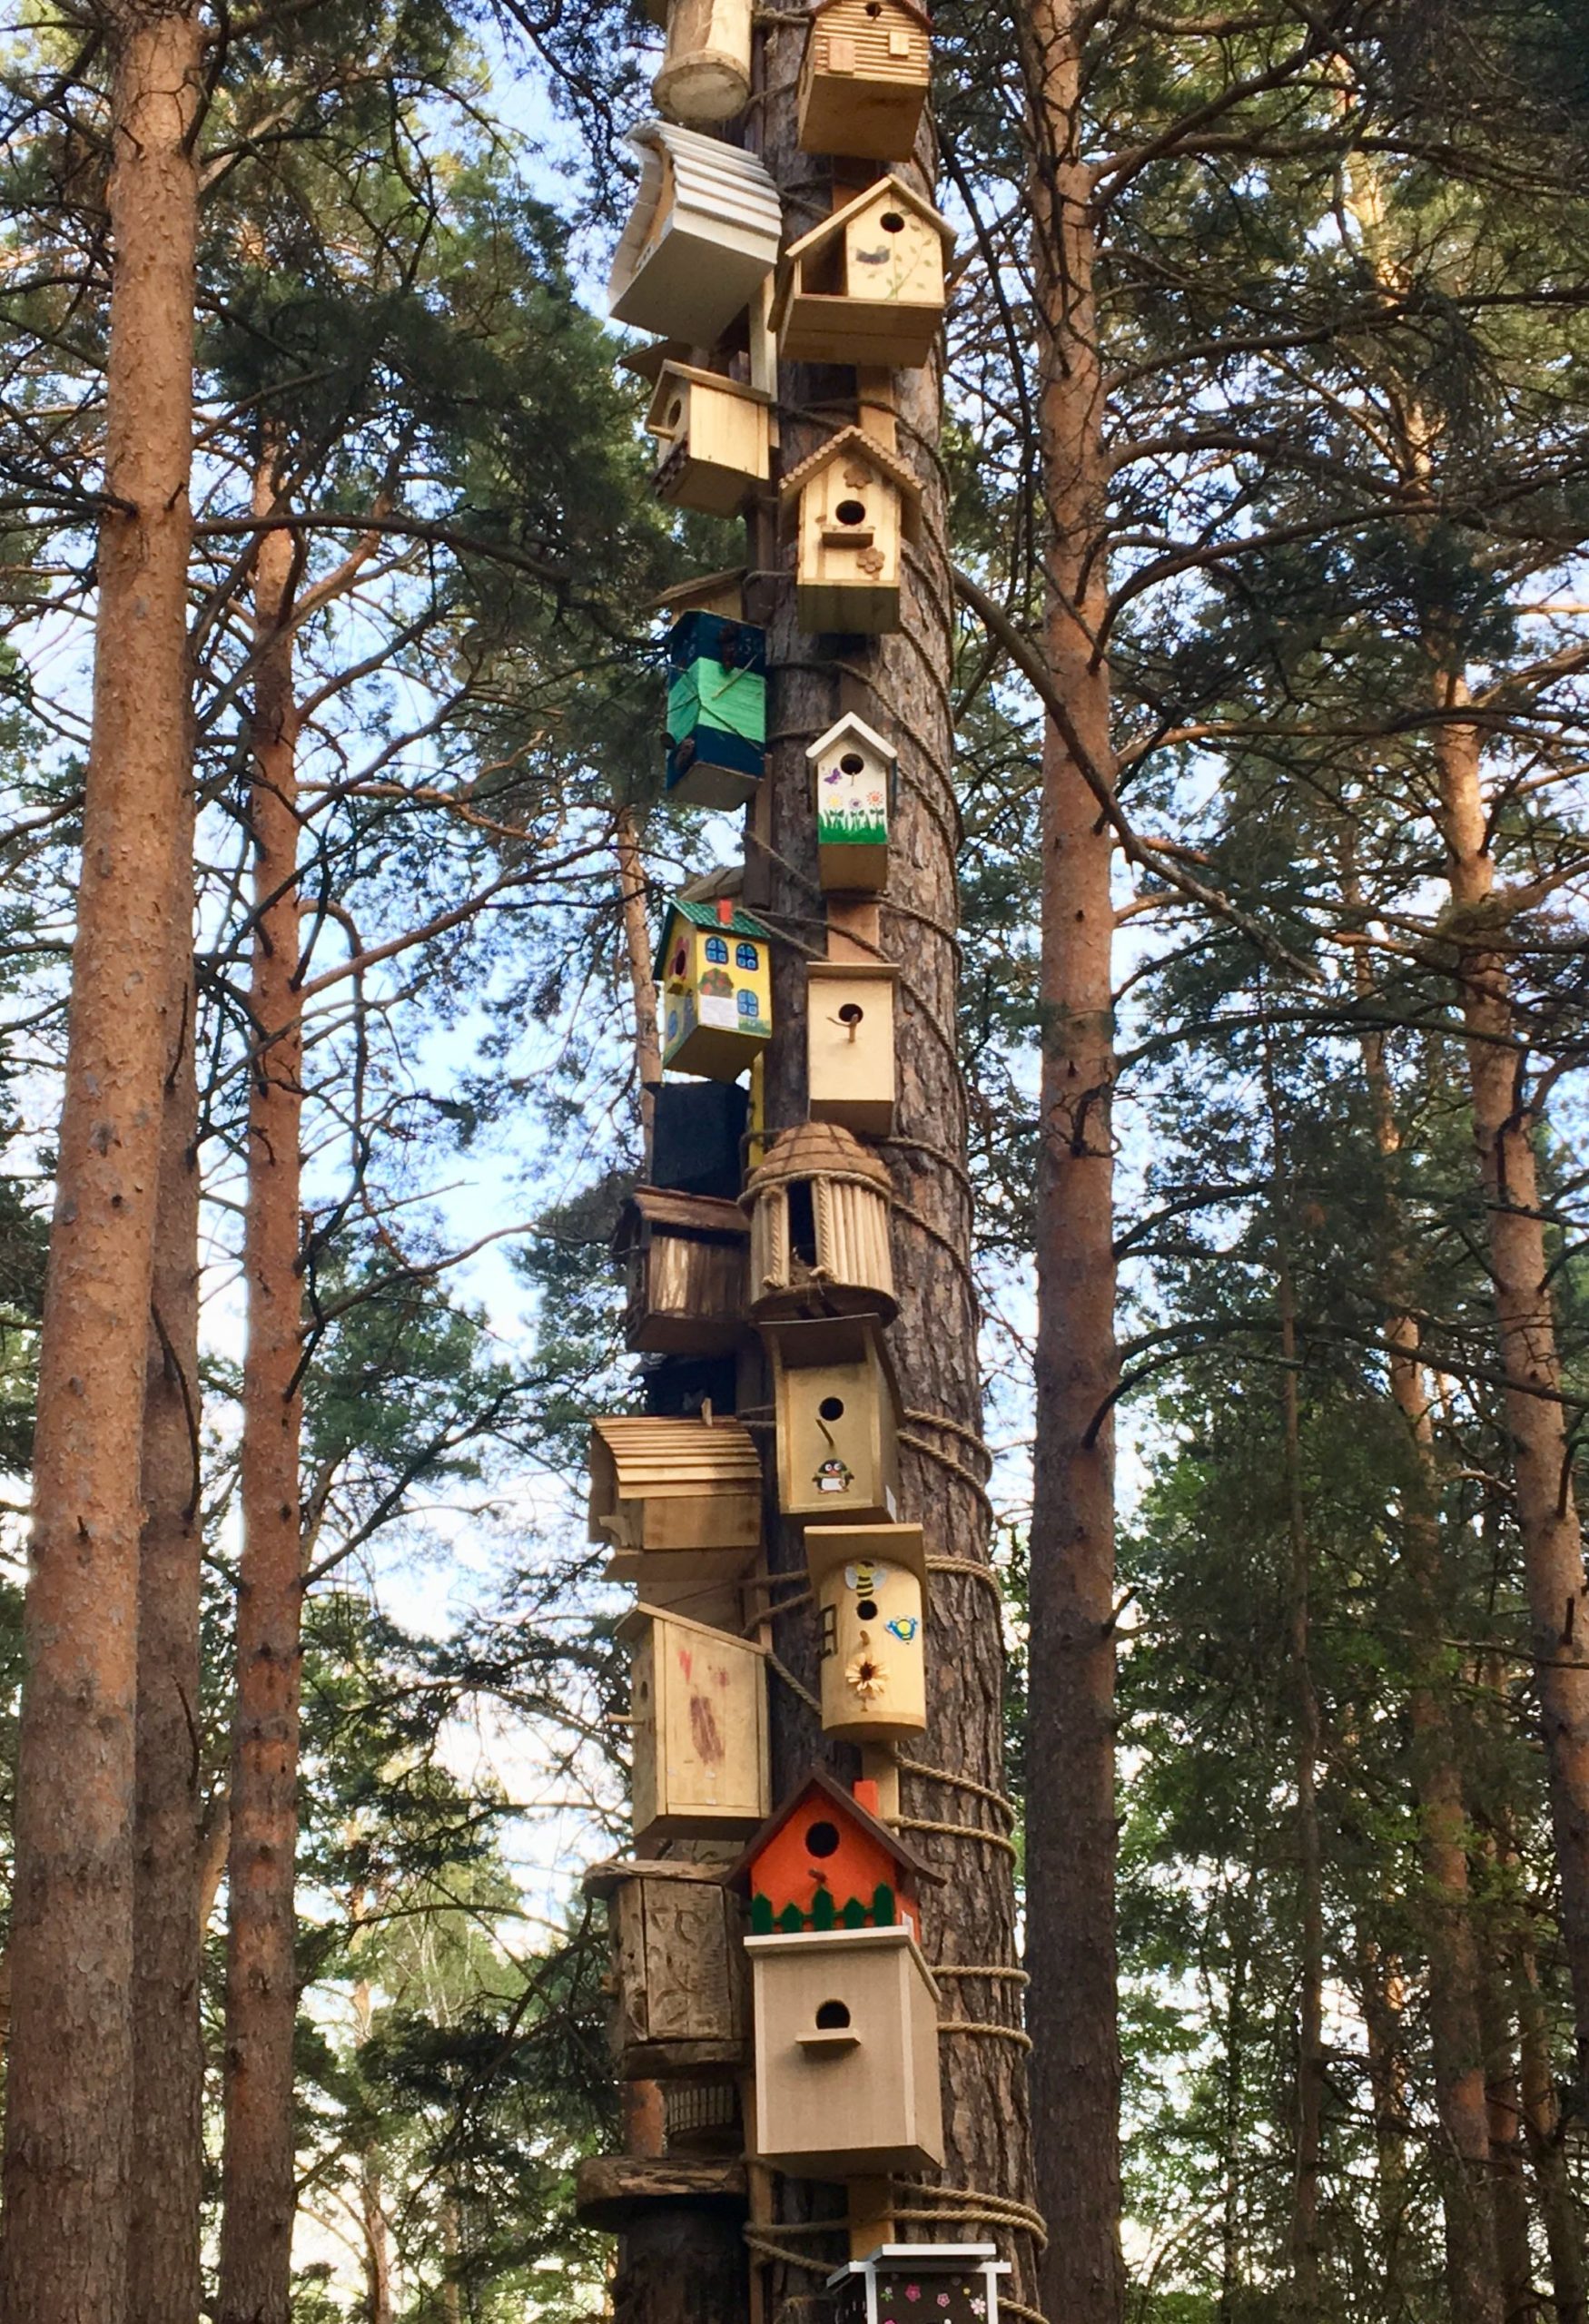 Where To Place A Birdhouse, best place to put a bluebird house, best place to put a bluebird house, 